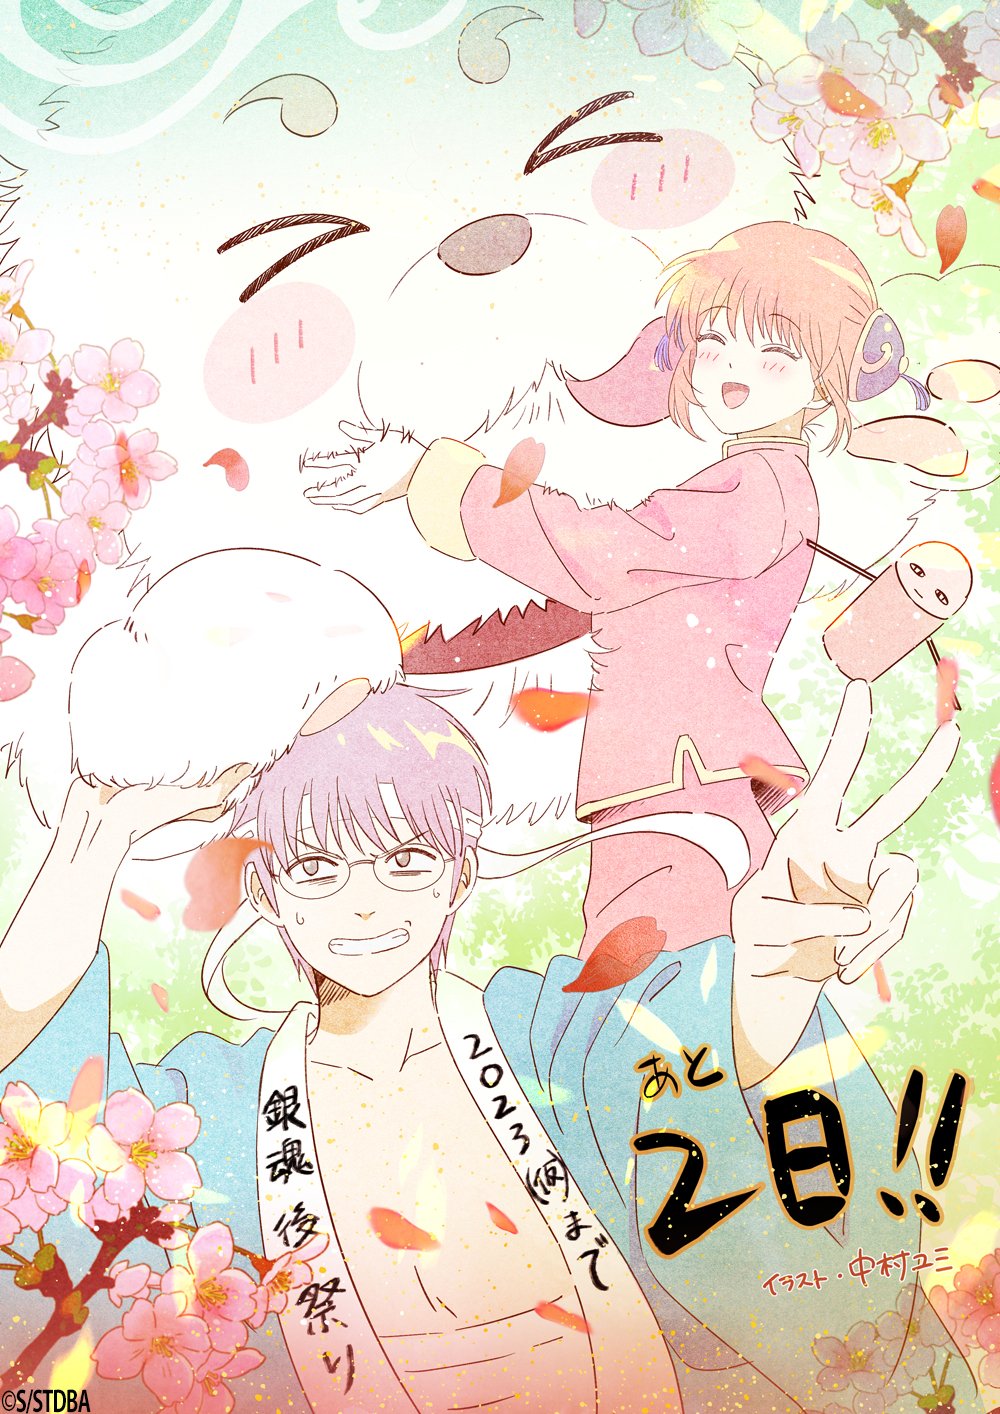 Gintama’s Infamous Spinoff ‘Ginpachi Sensei’ Gets its Own Anime